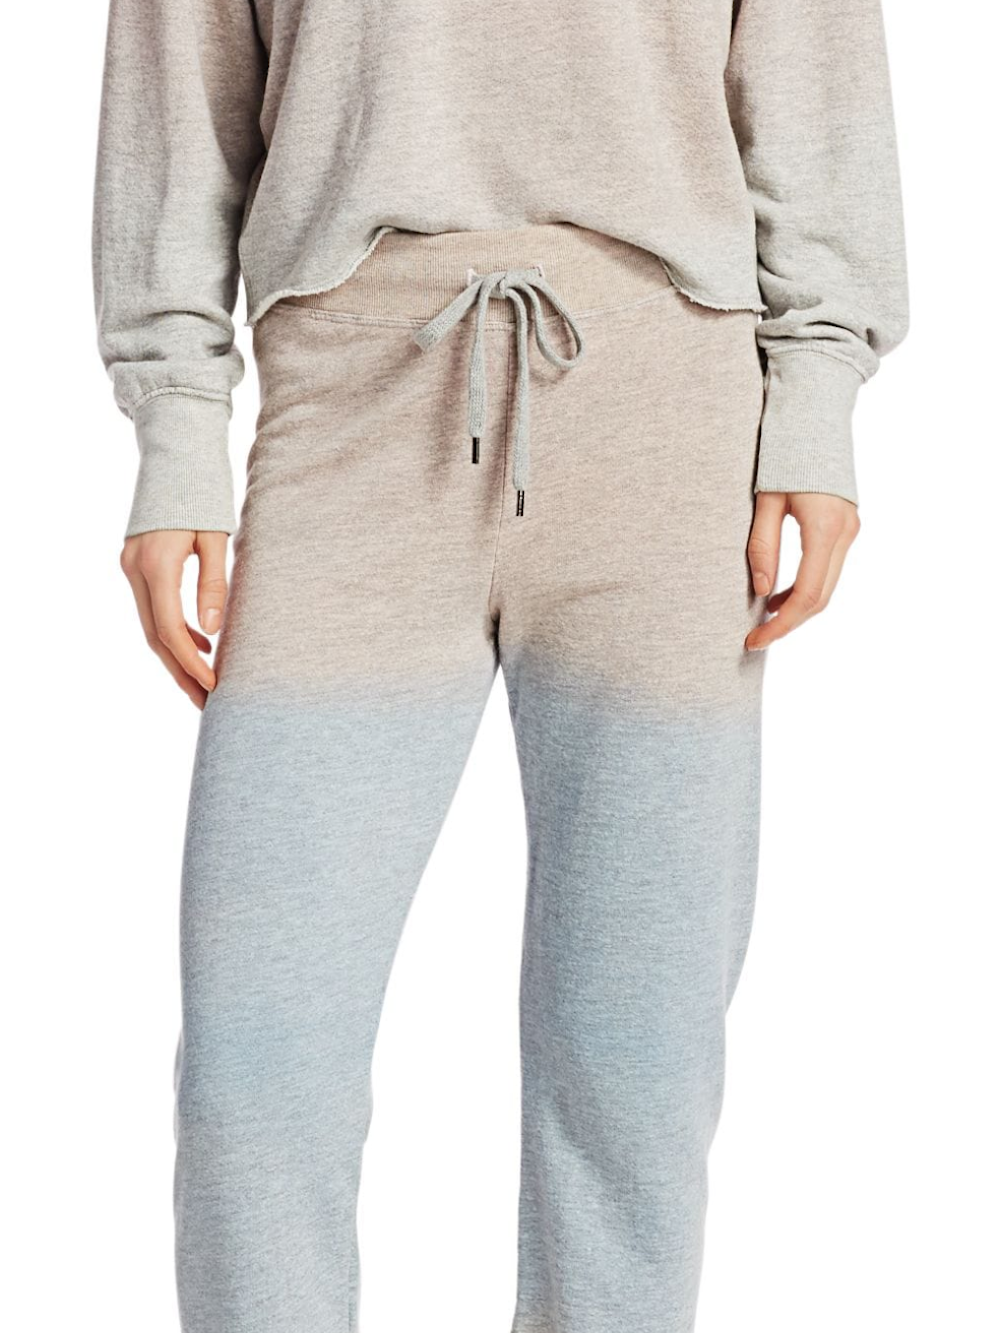 Lounge In Style In One Of These 10 Sweat Sets